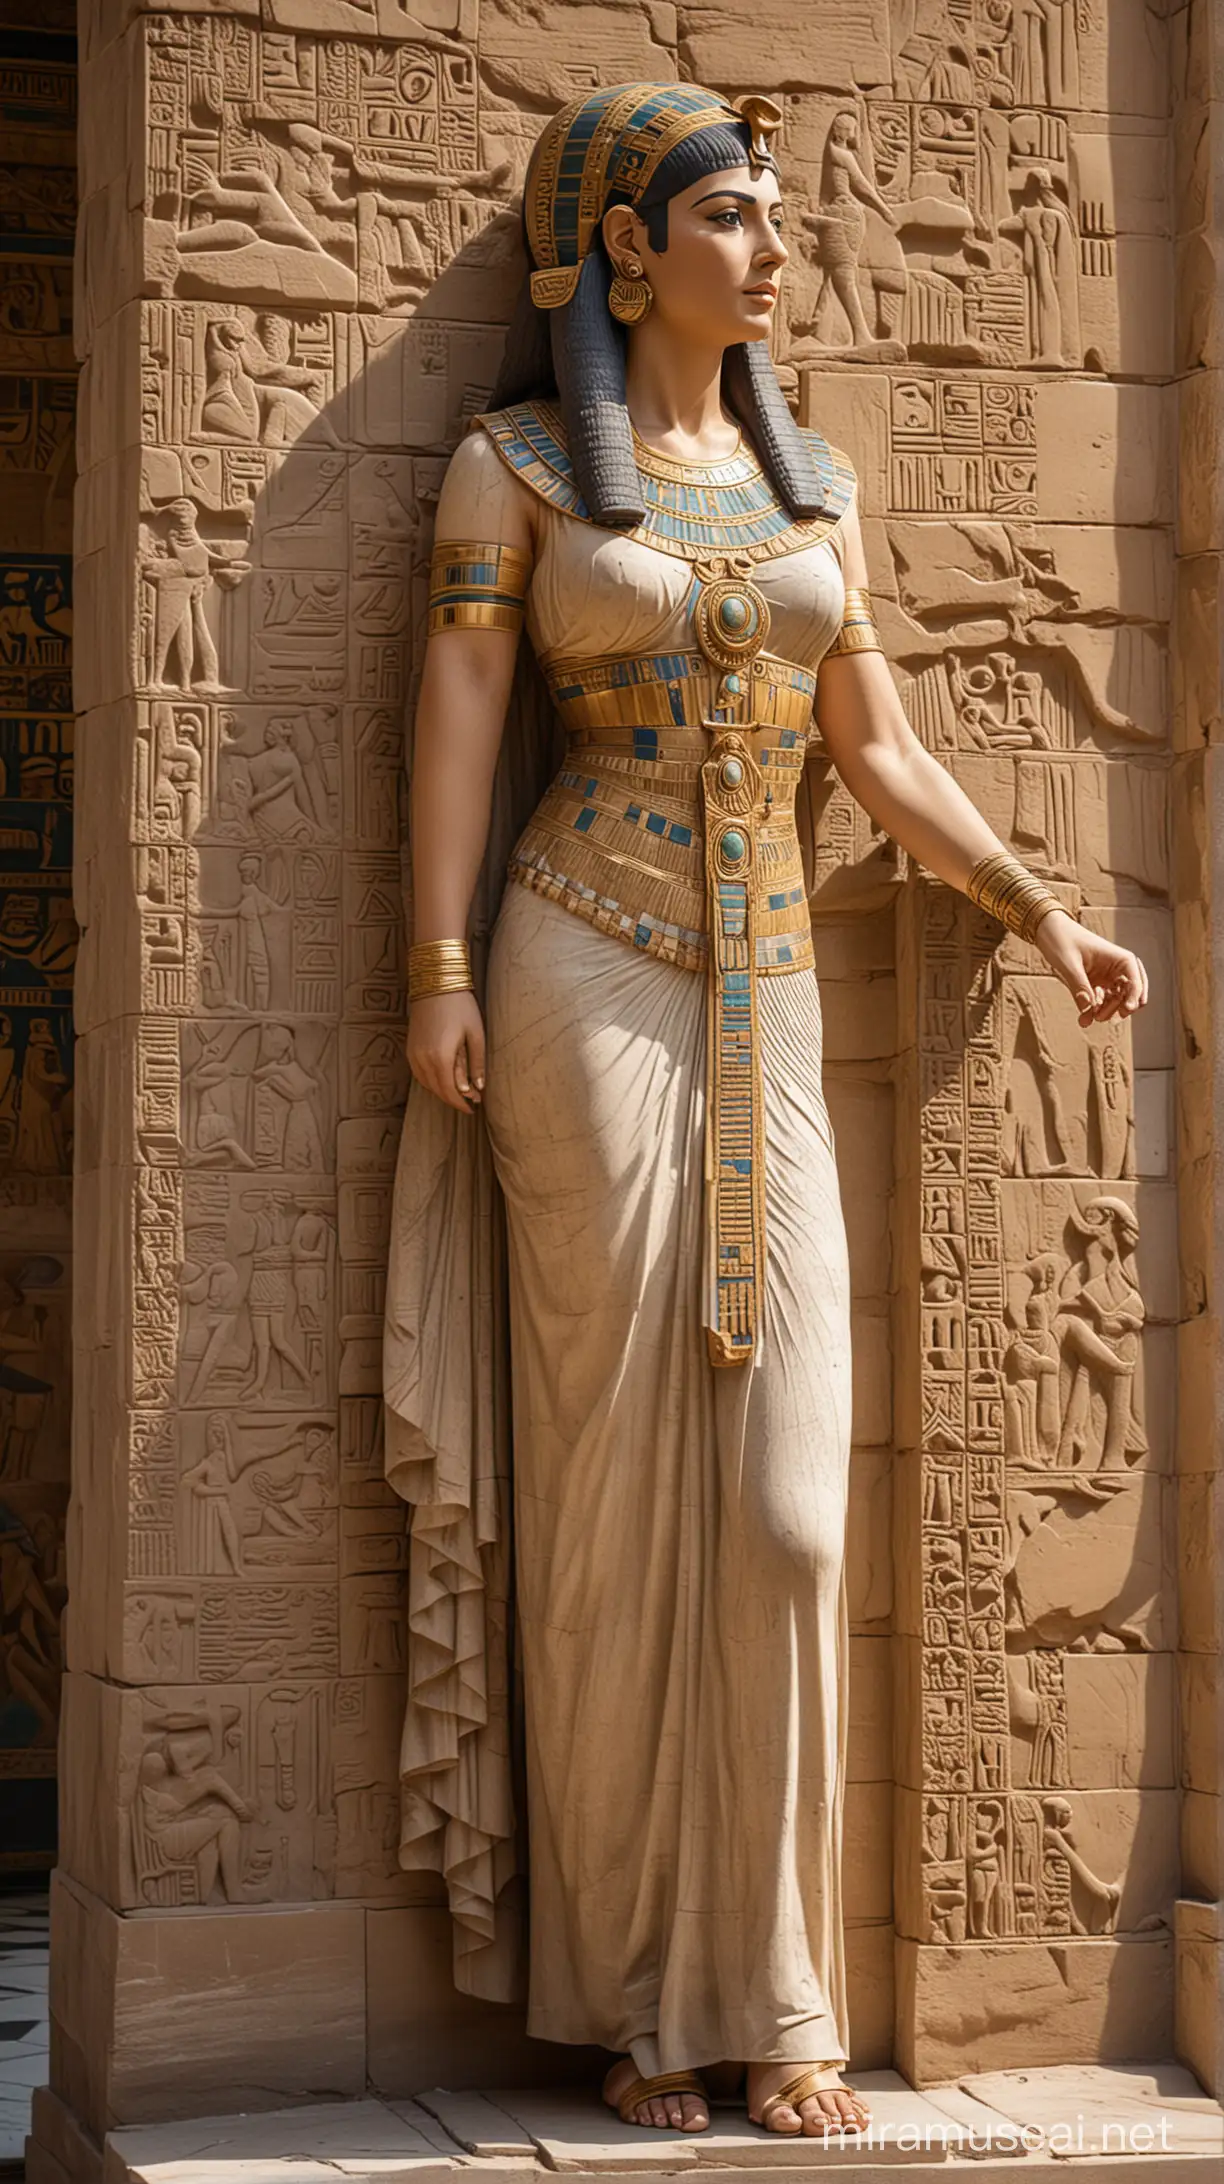 An image depicting a full-scale statue of Cleopatra in an ancient architectural setting. The statue should be intricately crafted, emphasizing Cleopatra's graceful features and regal posture.